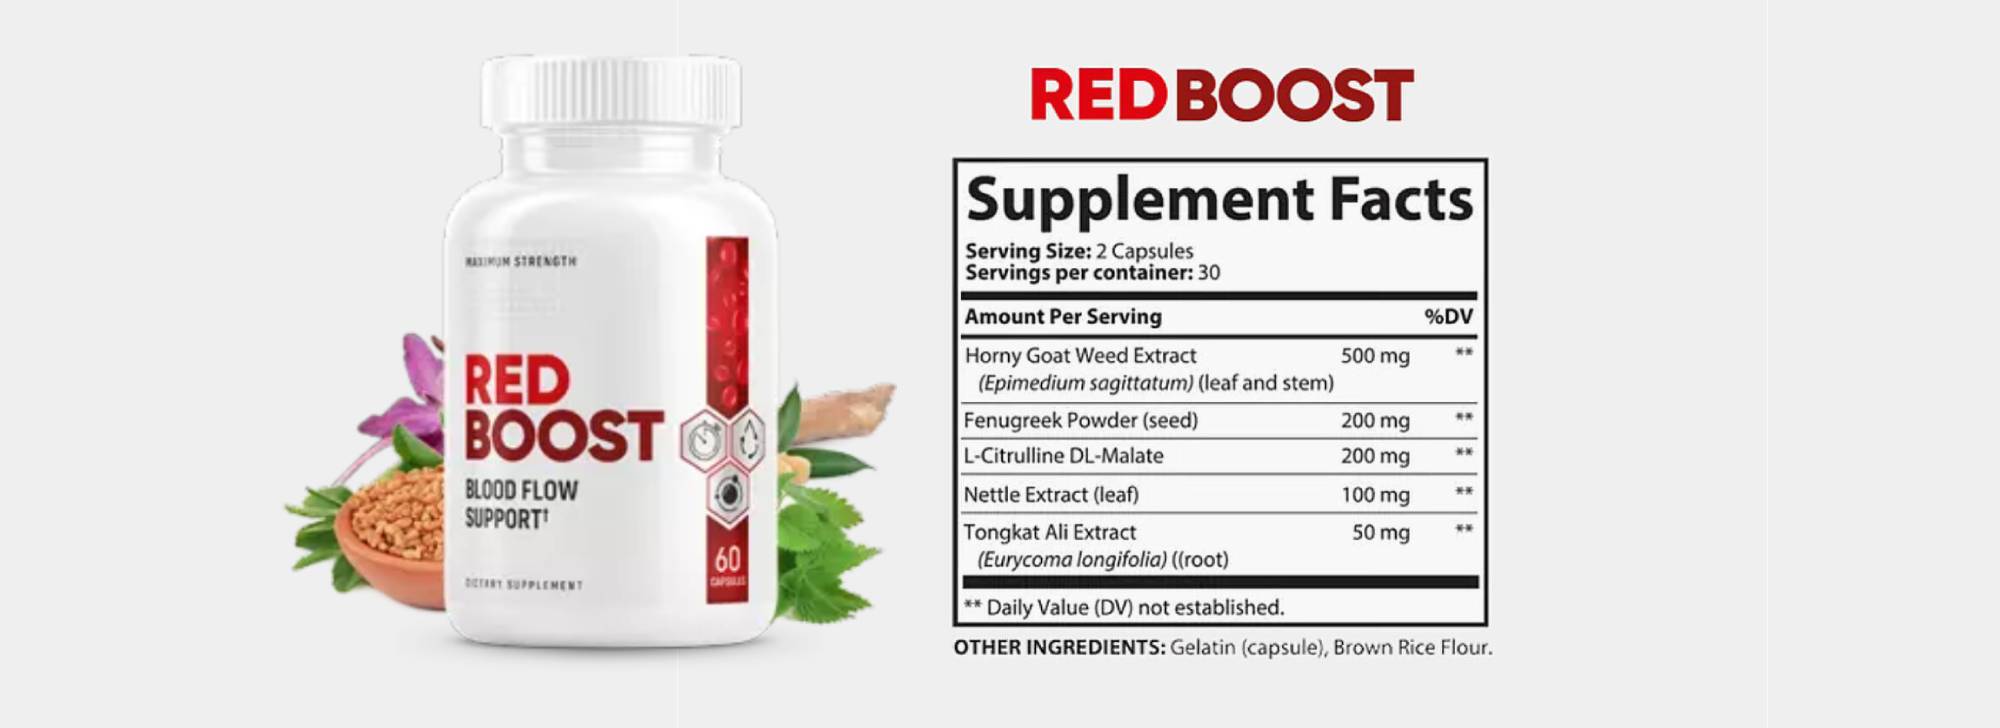 Red Boost male sexual supplement Facts